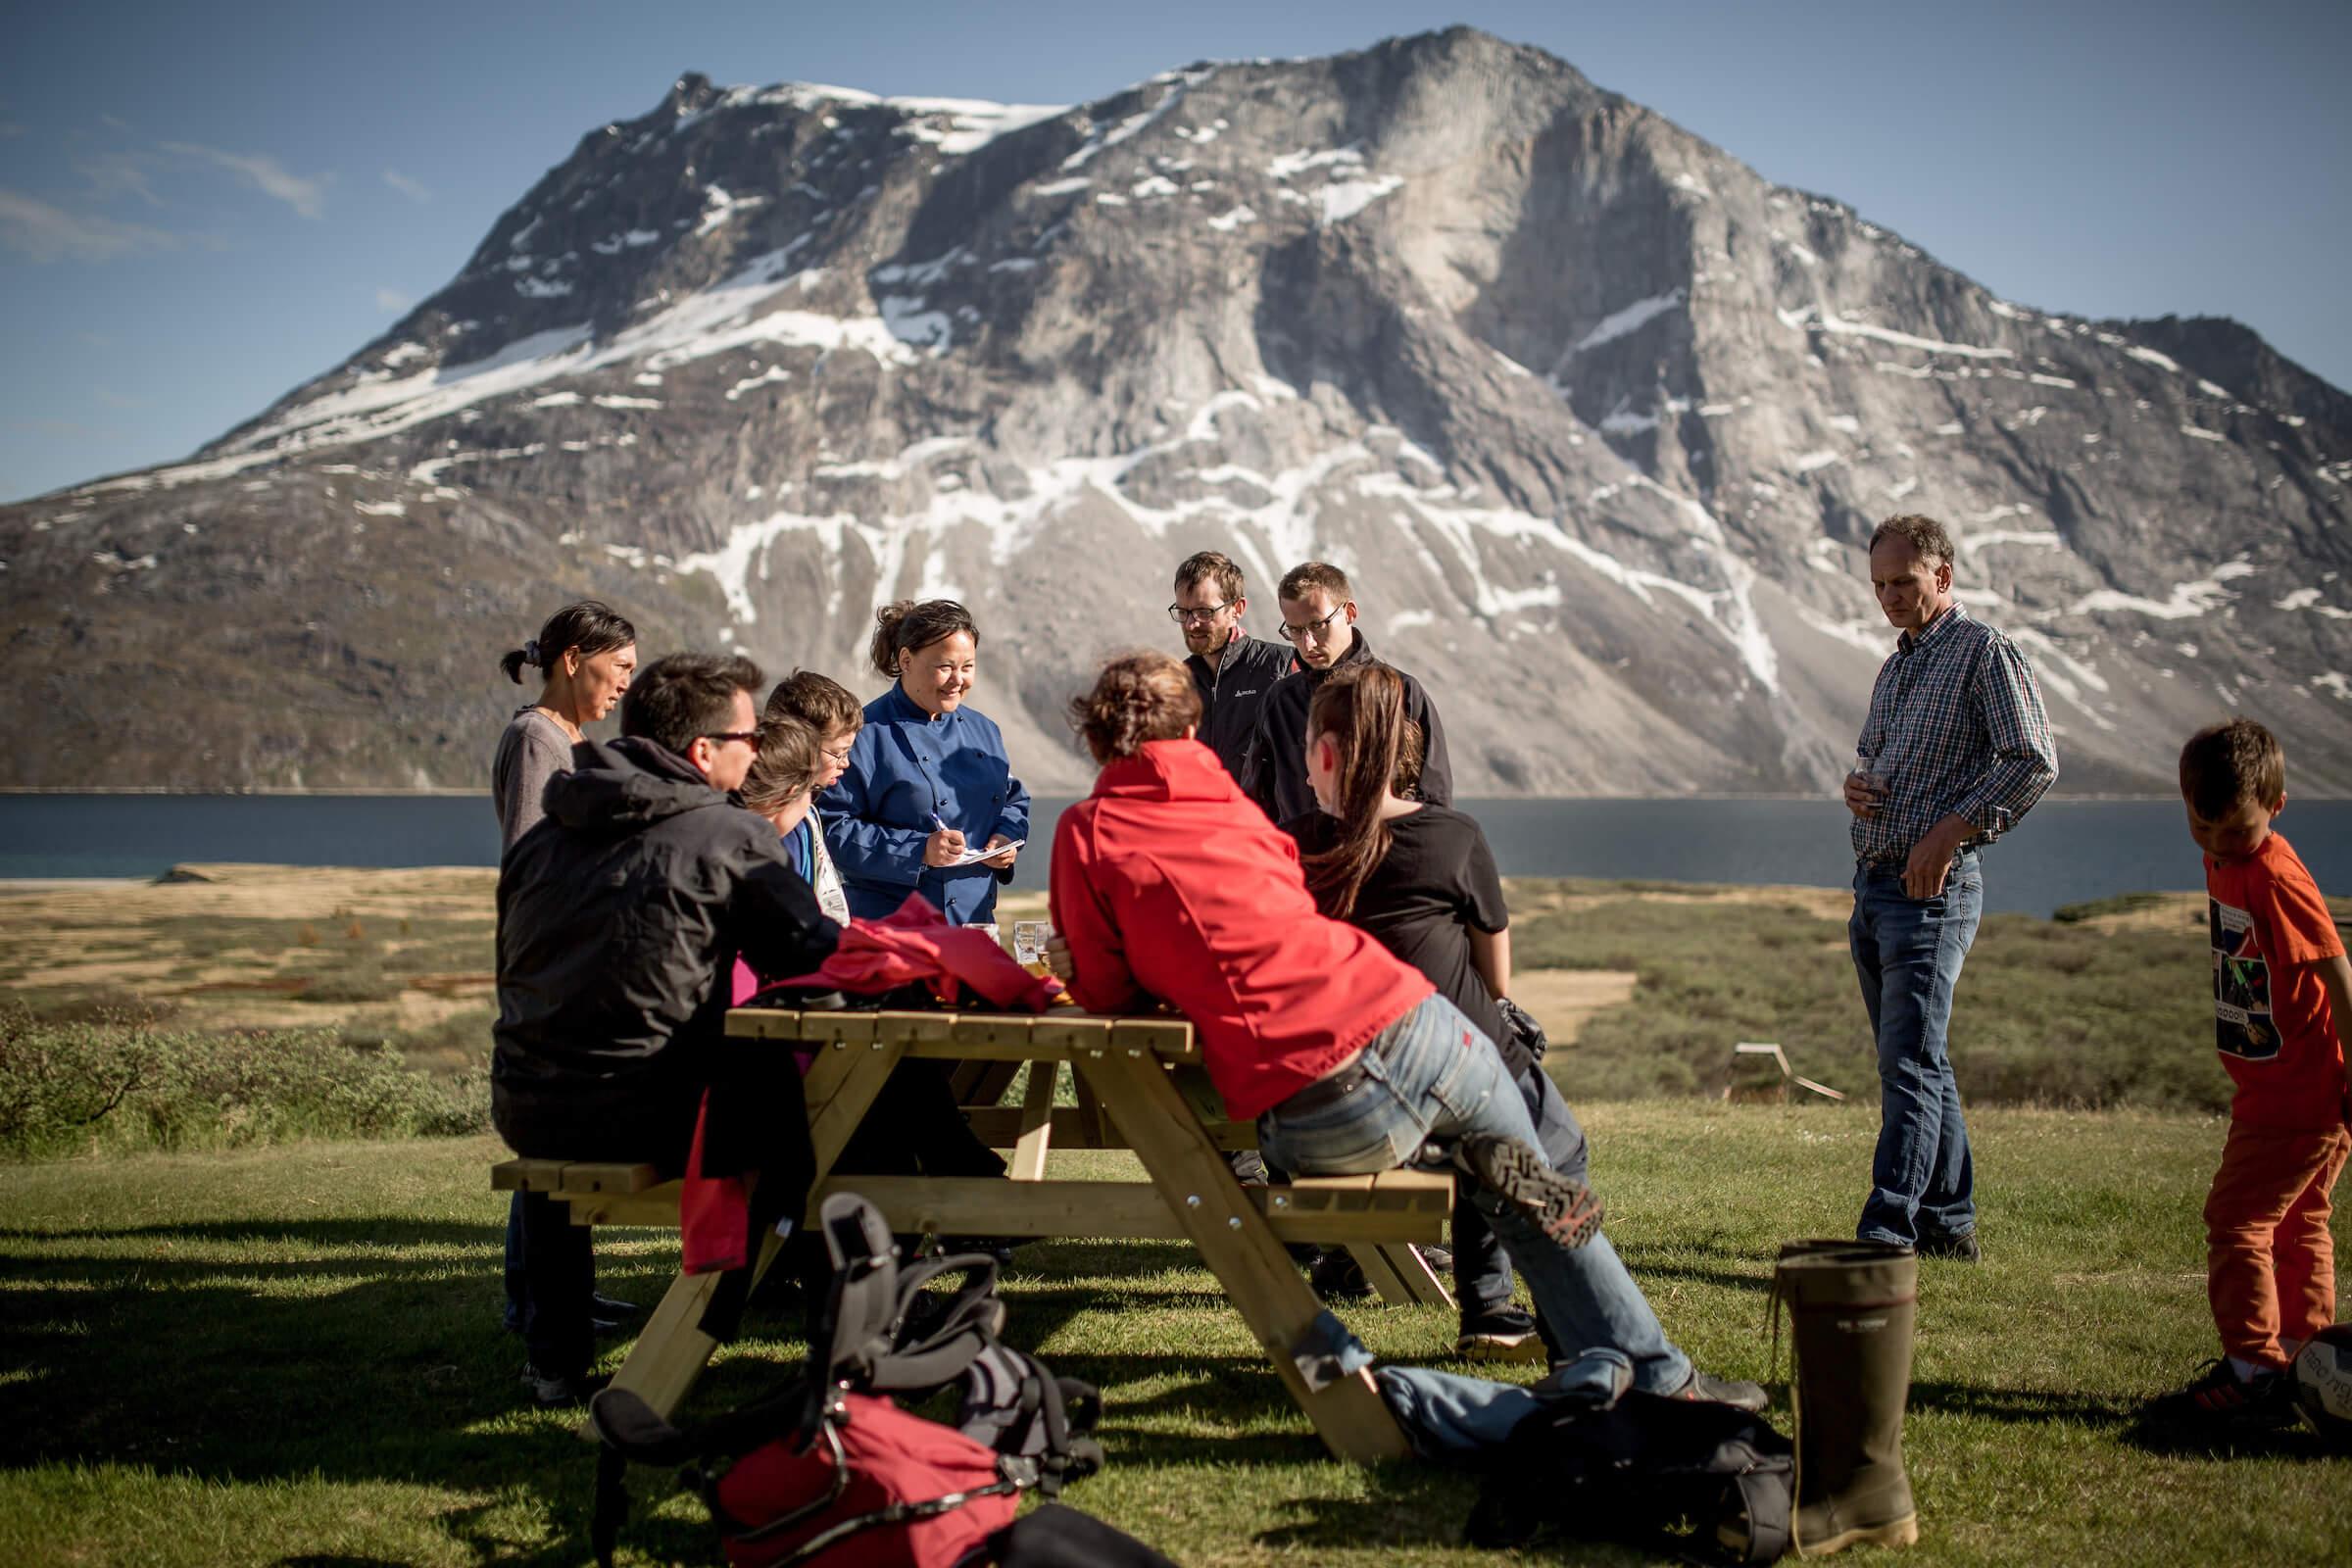 The waiter taking orders from guests at the Qooqqut Nuan restaurant in the fjord near Nuuk in Greenland. By Mads Pihl